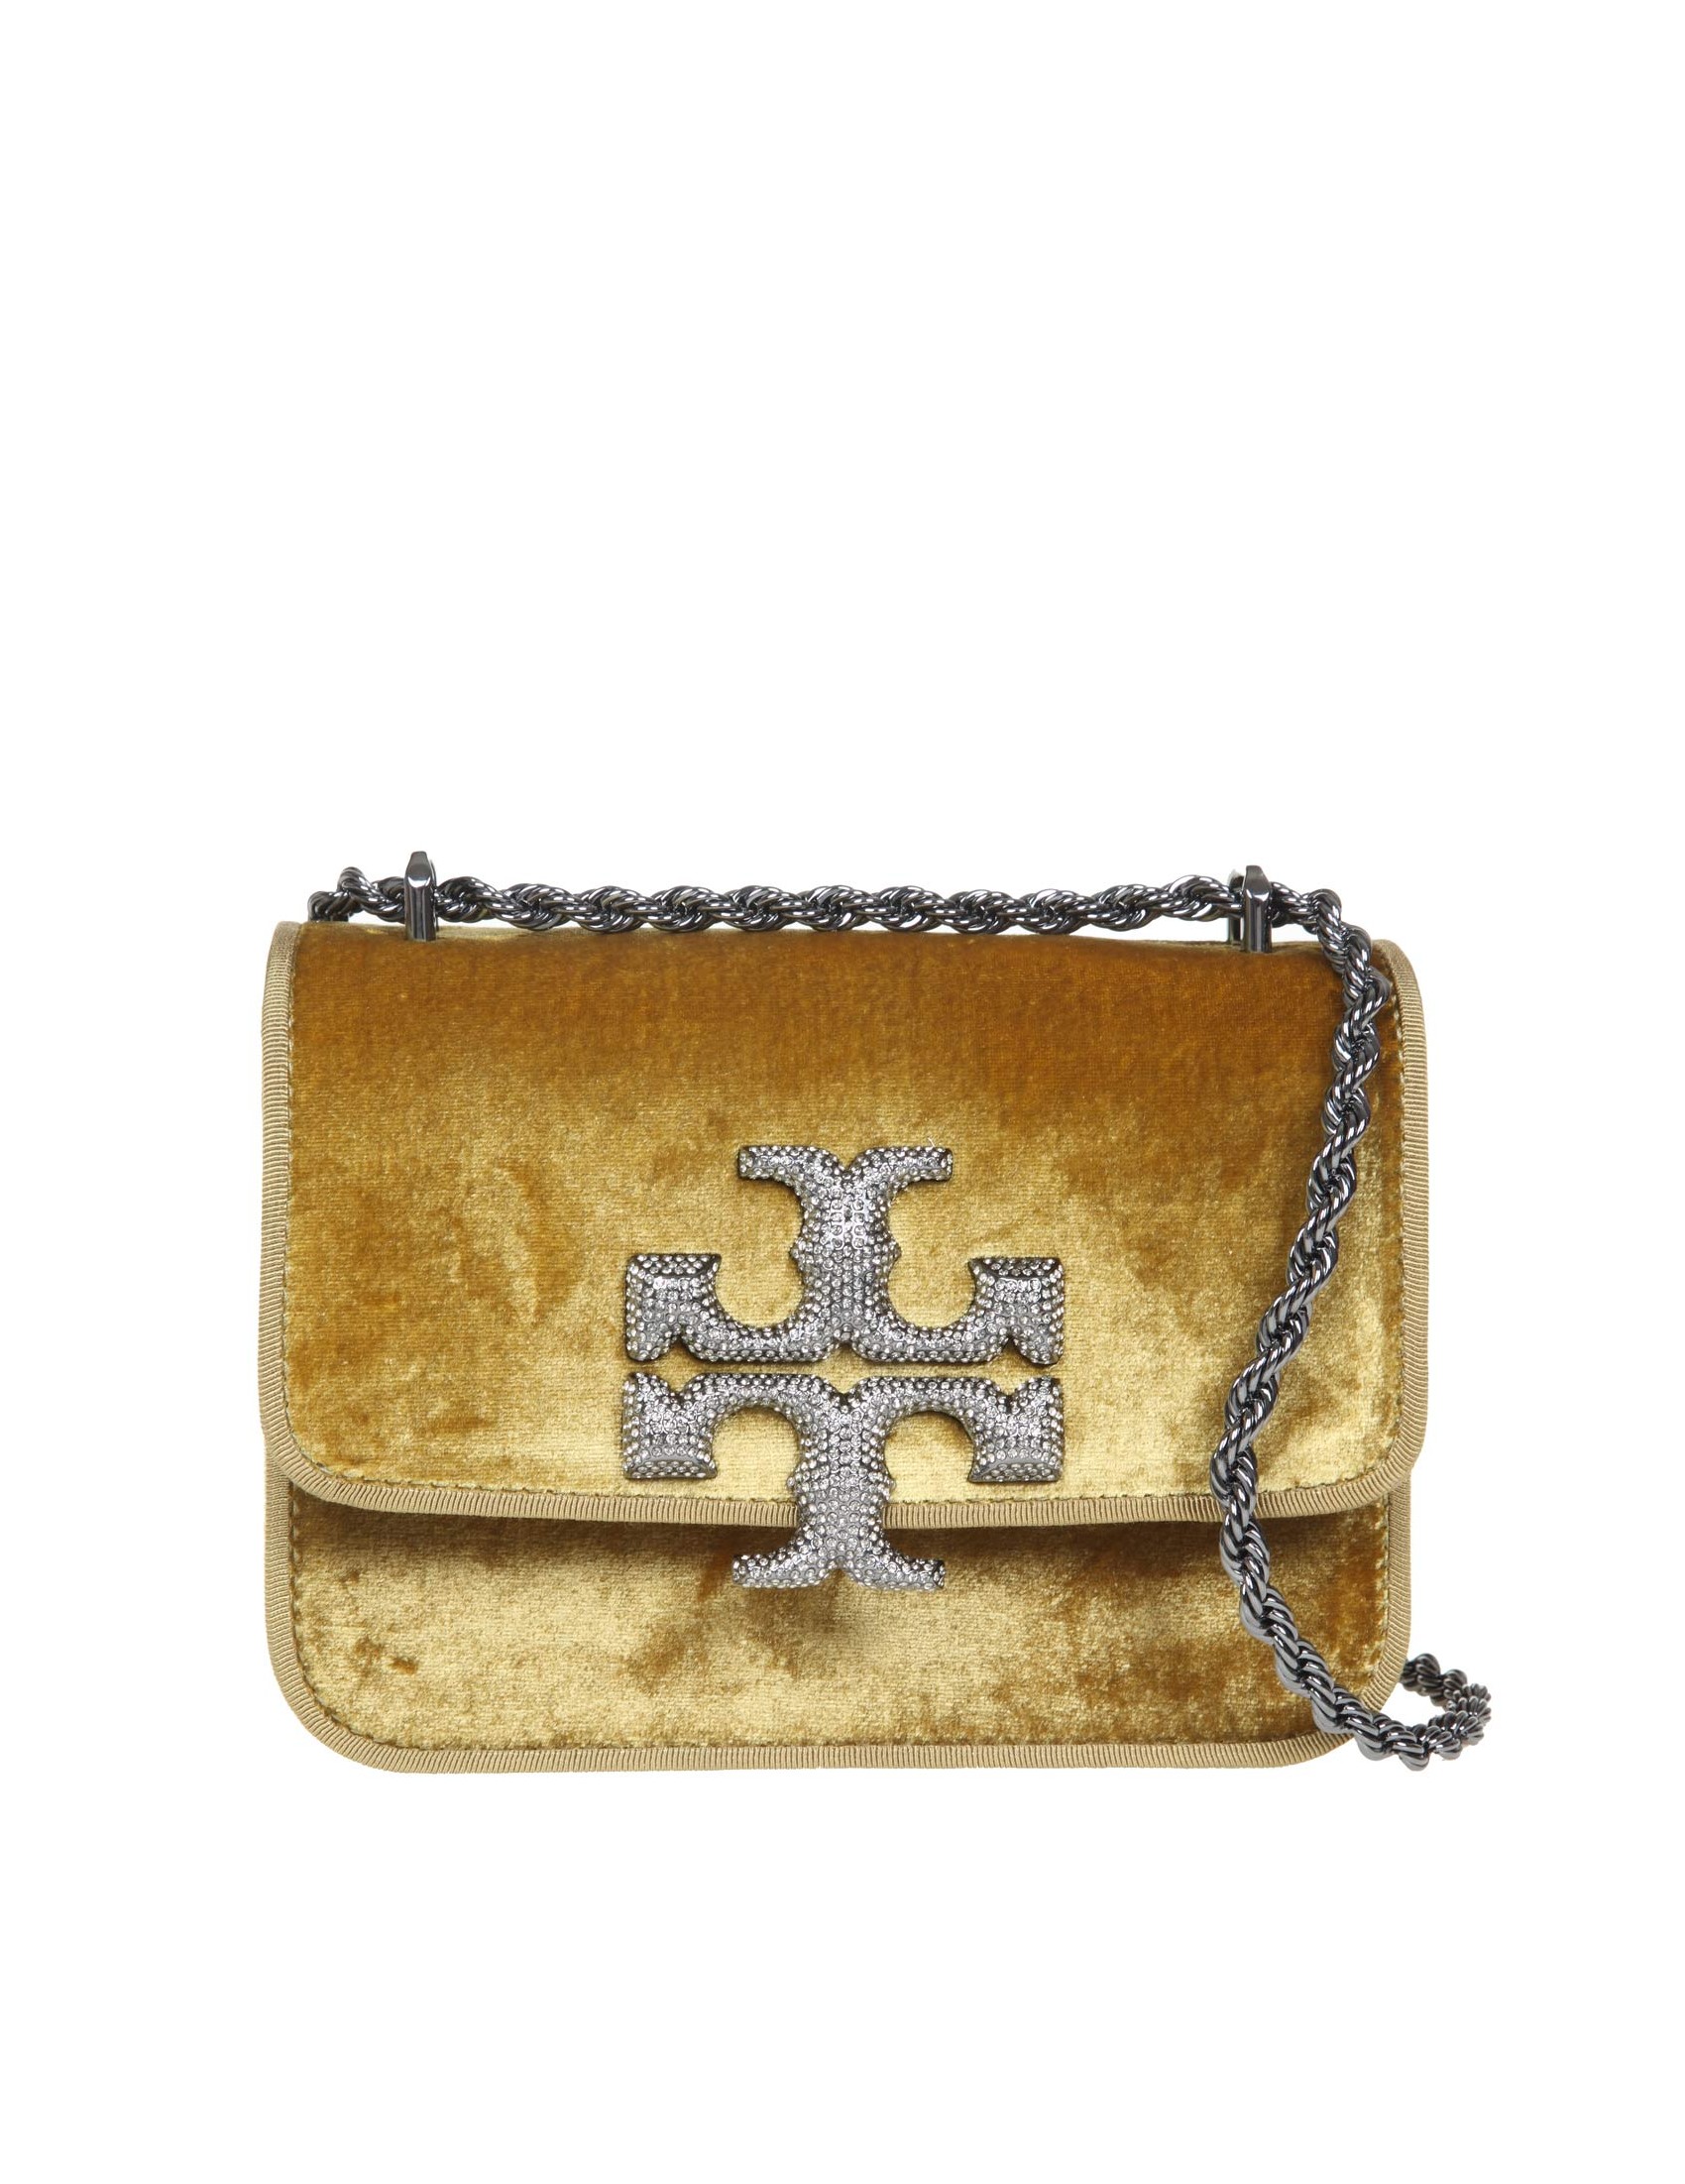 TORY BURCH ELEANOR BAG IN VELVET WITH LOGO WITH CRYSTALS